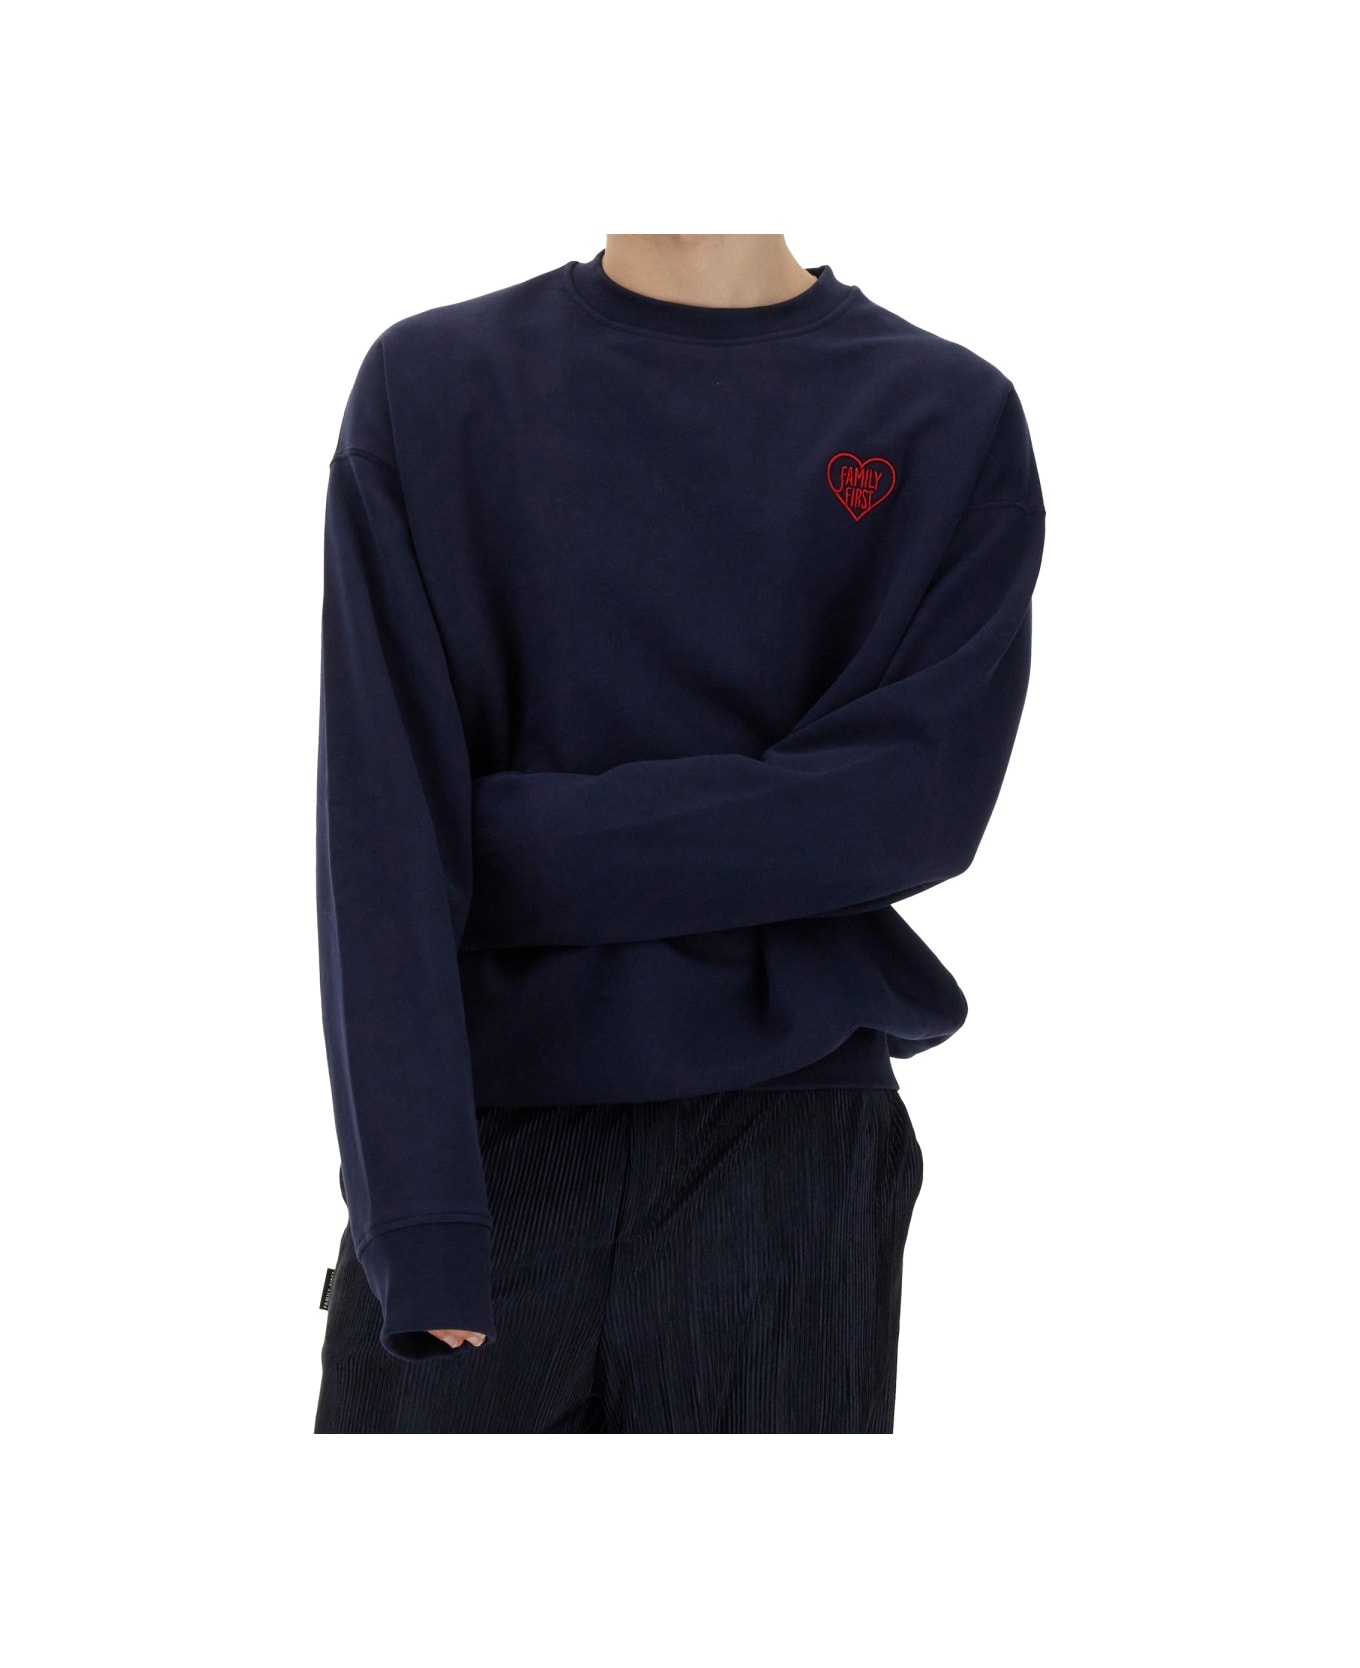 Family First Milano Sweatshirt With Heart Embroidery - BLUE